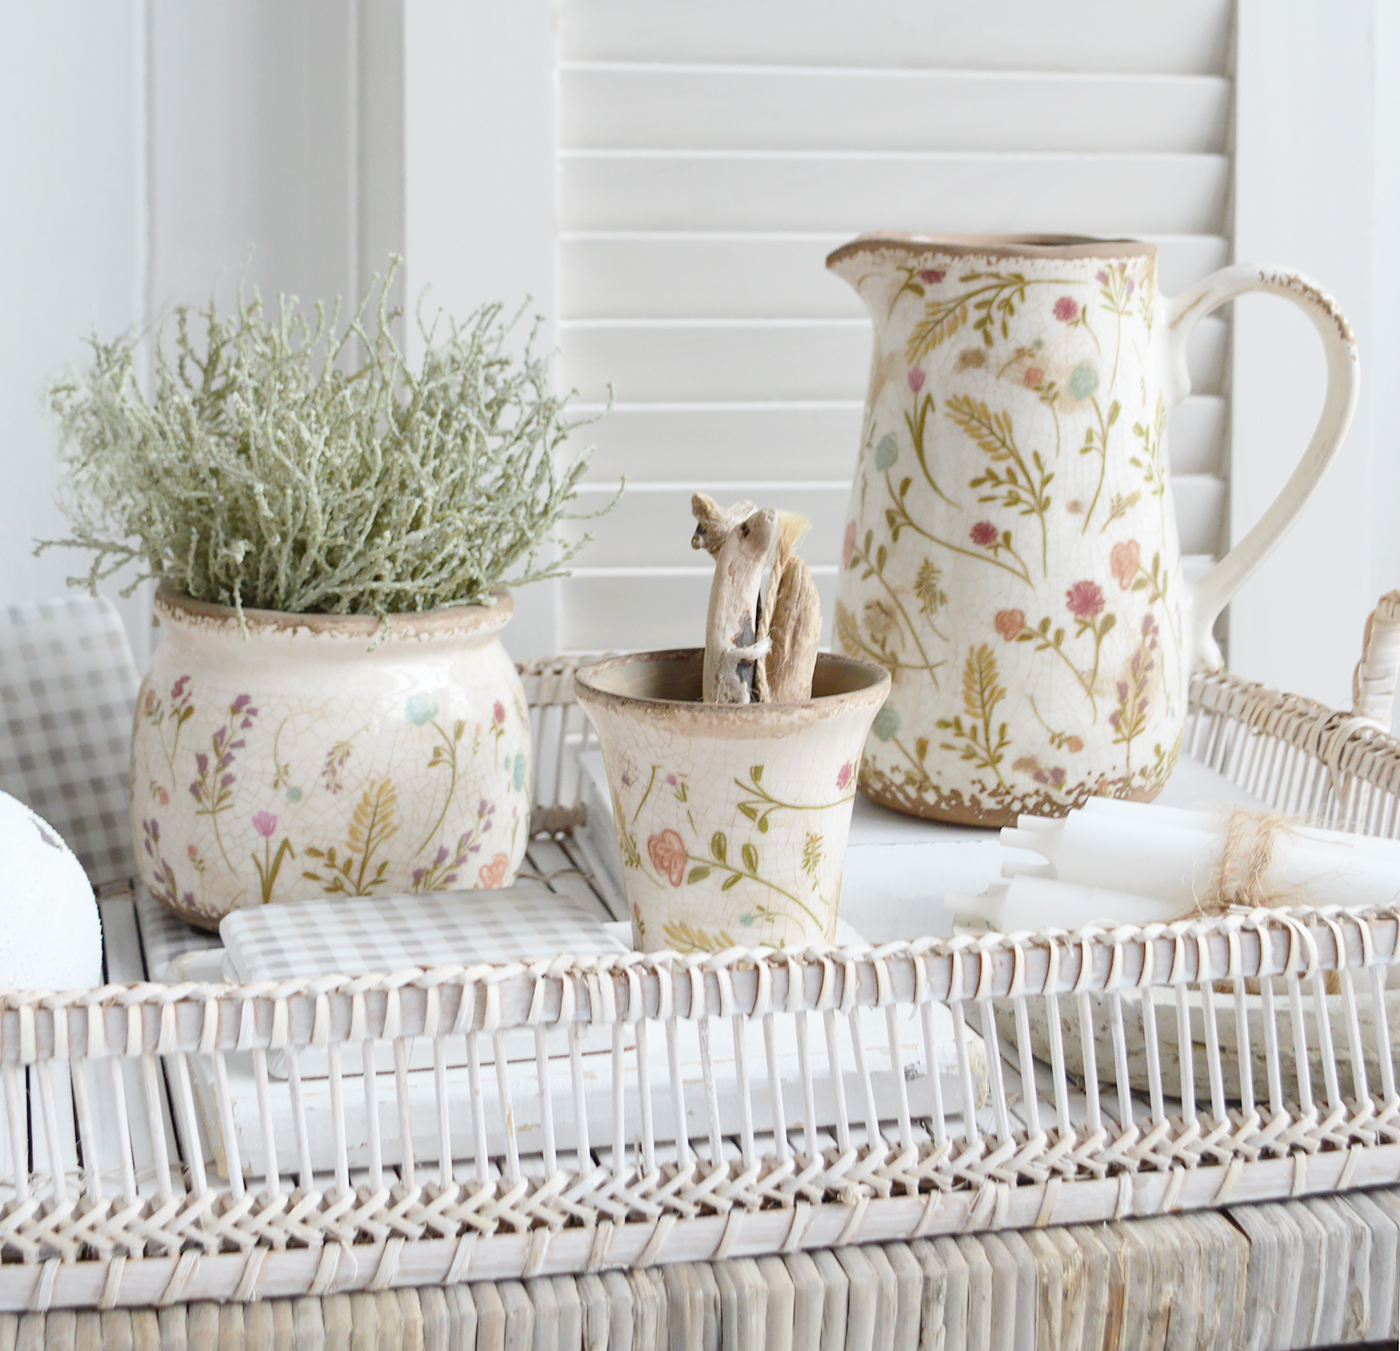 The marston range of floral vintaged ceramic, vase, jug and pots to style New England homes